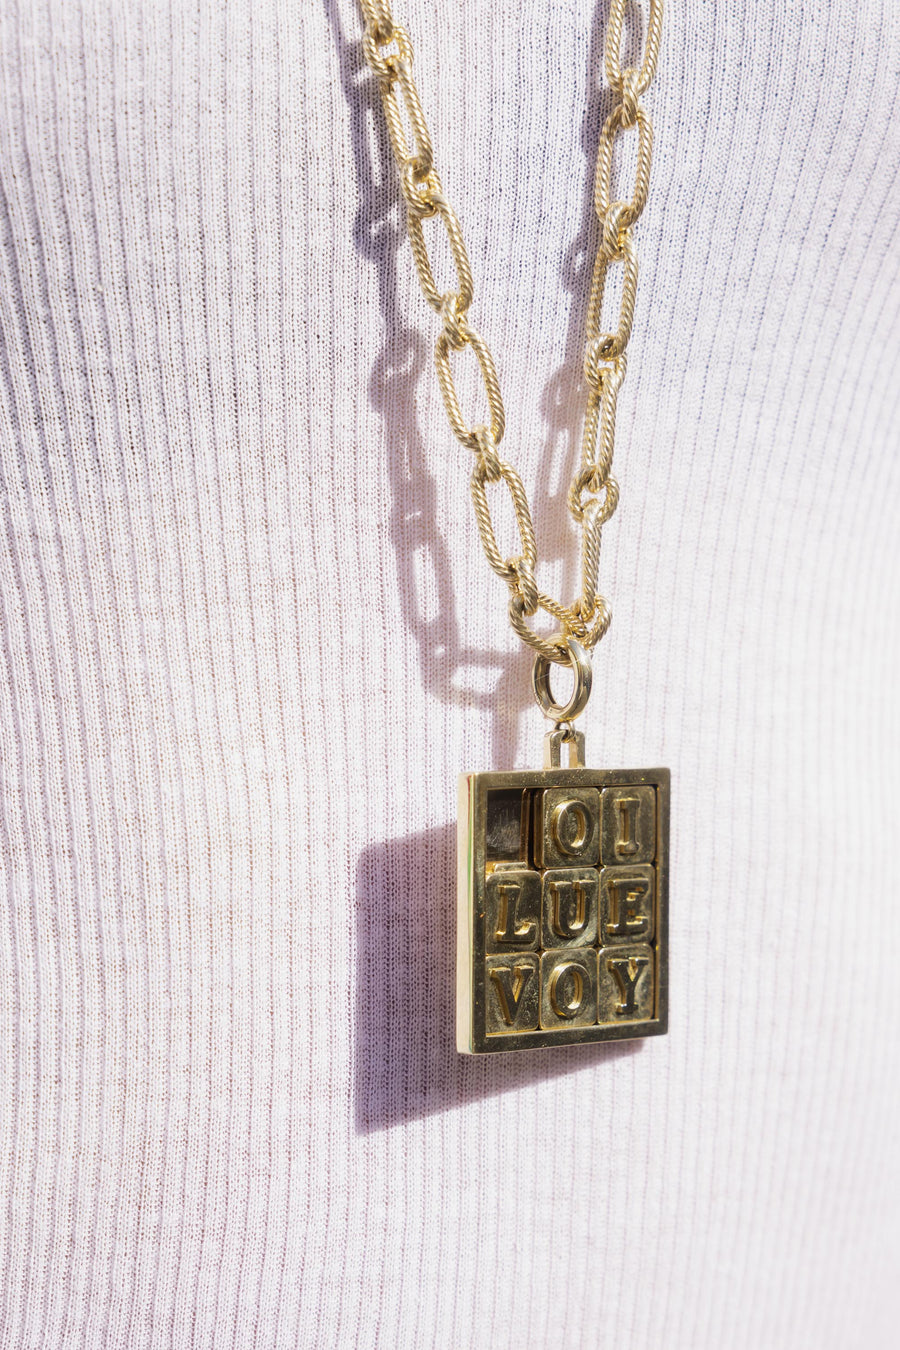 14k Yellow Gold Puzzle "I LOVE YOU" Pendant and Necklace